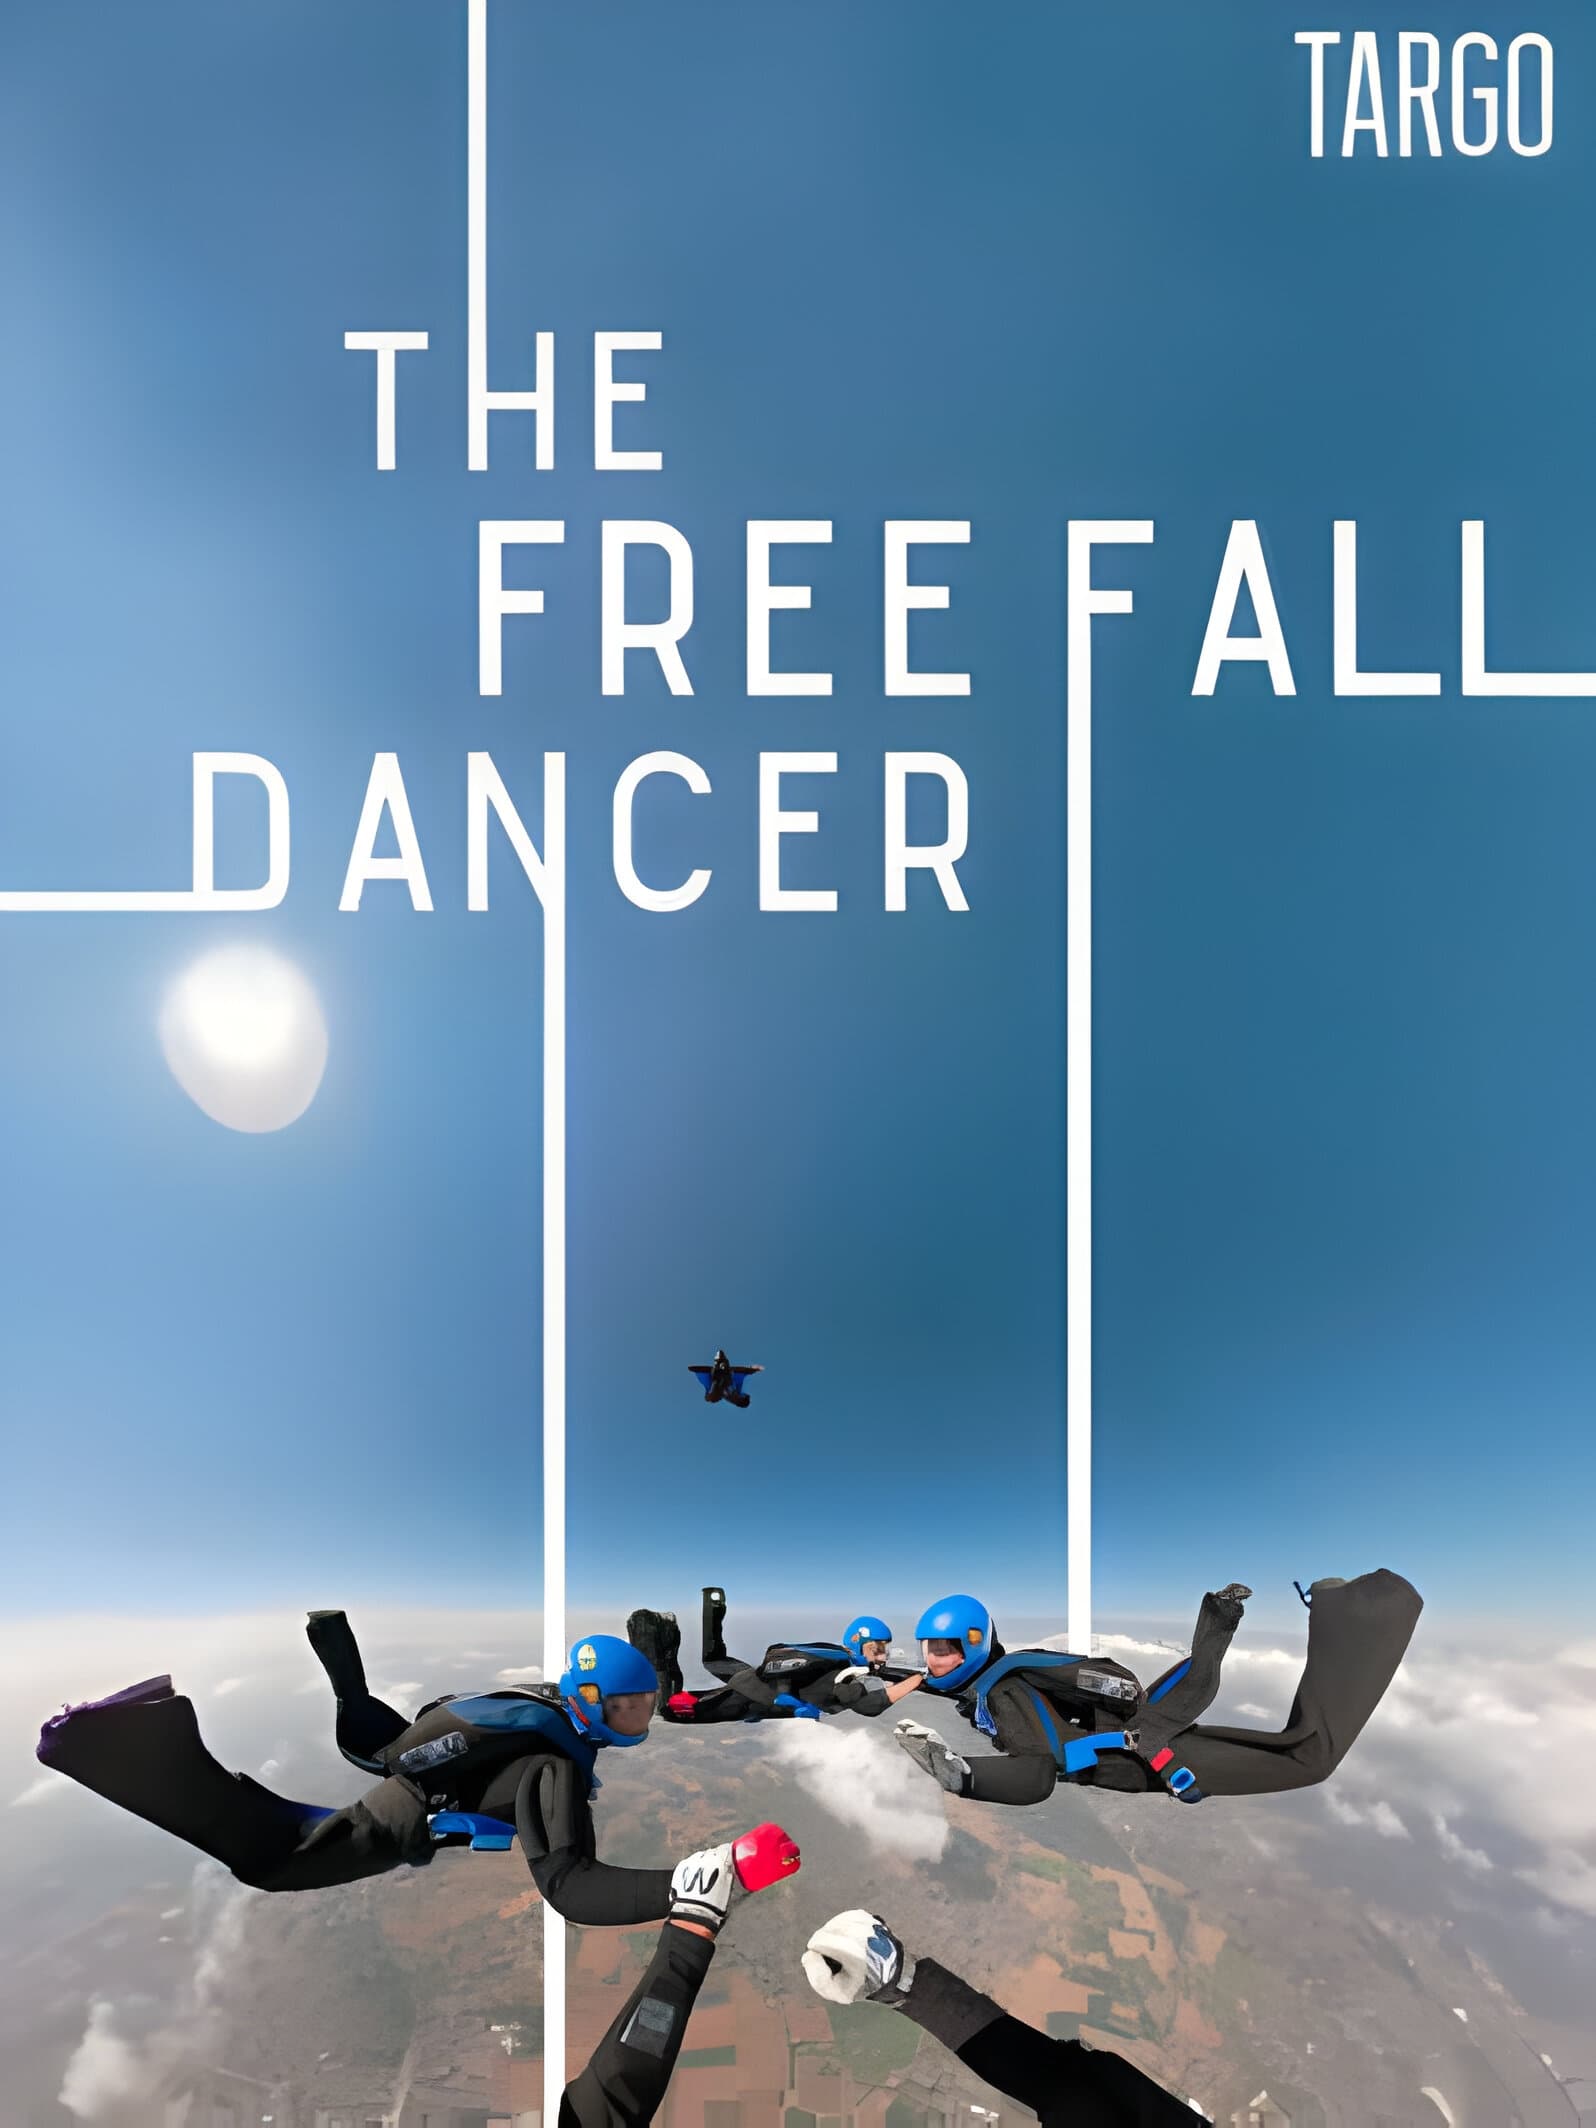 The Freefall Dancer